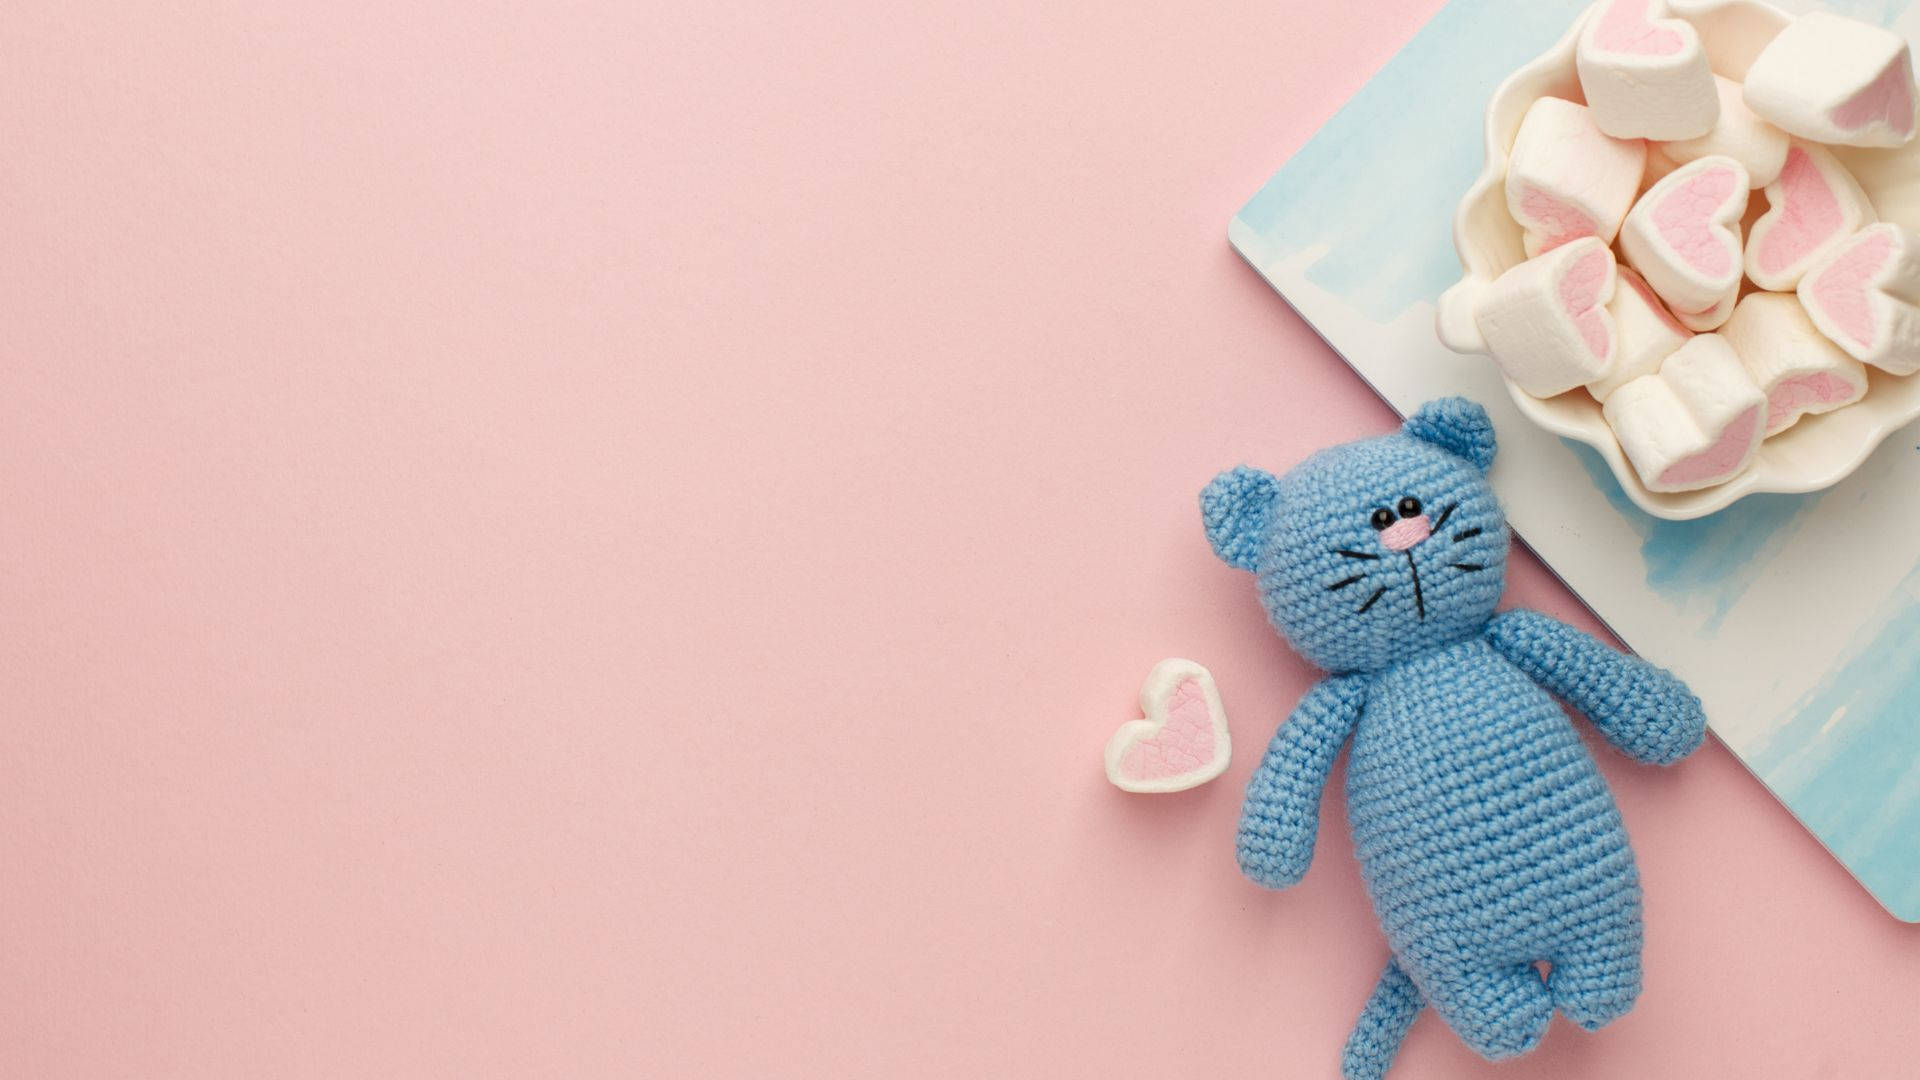 A Blue Crochet Cat With Marshmallows On A Pink Background Background